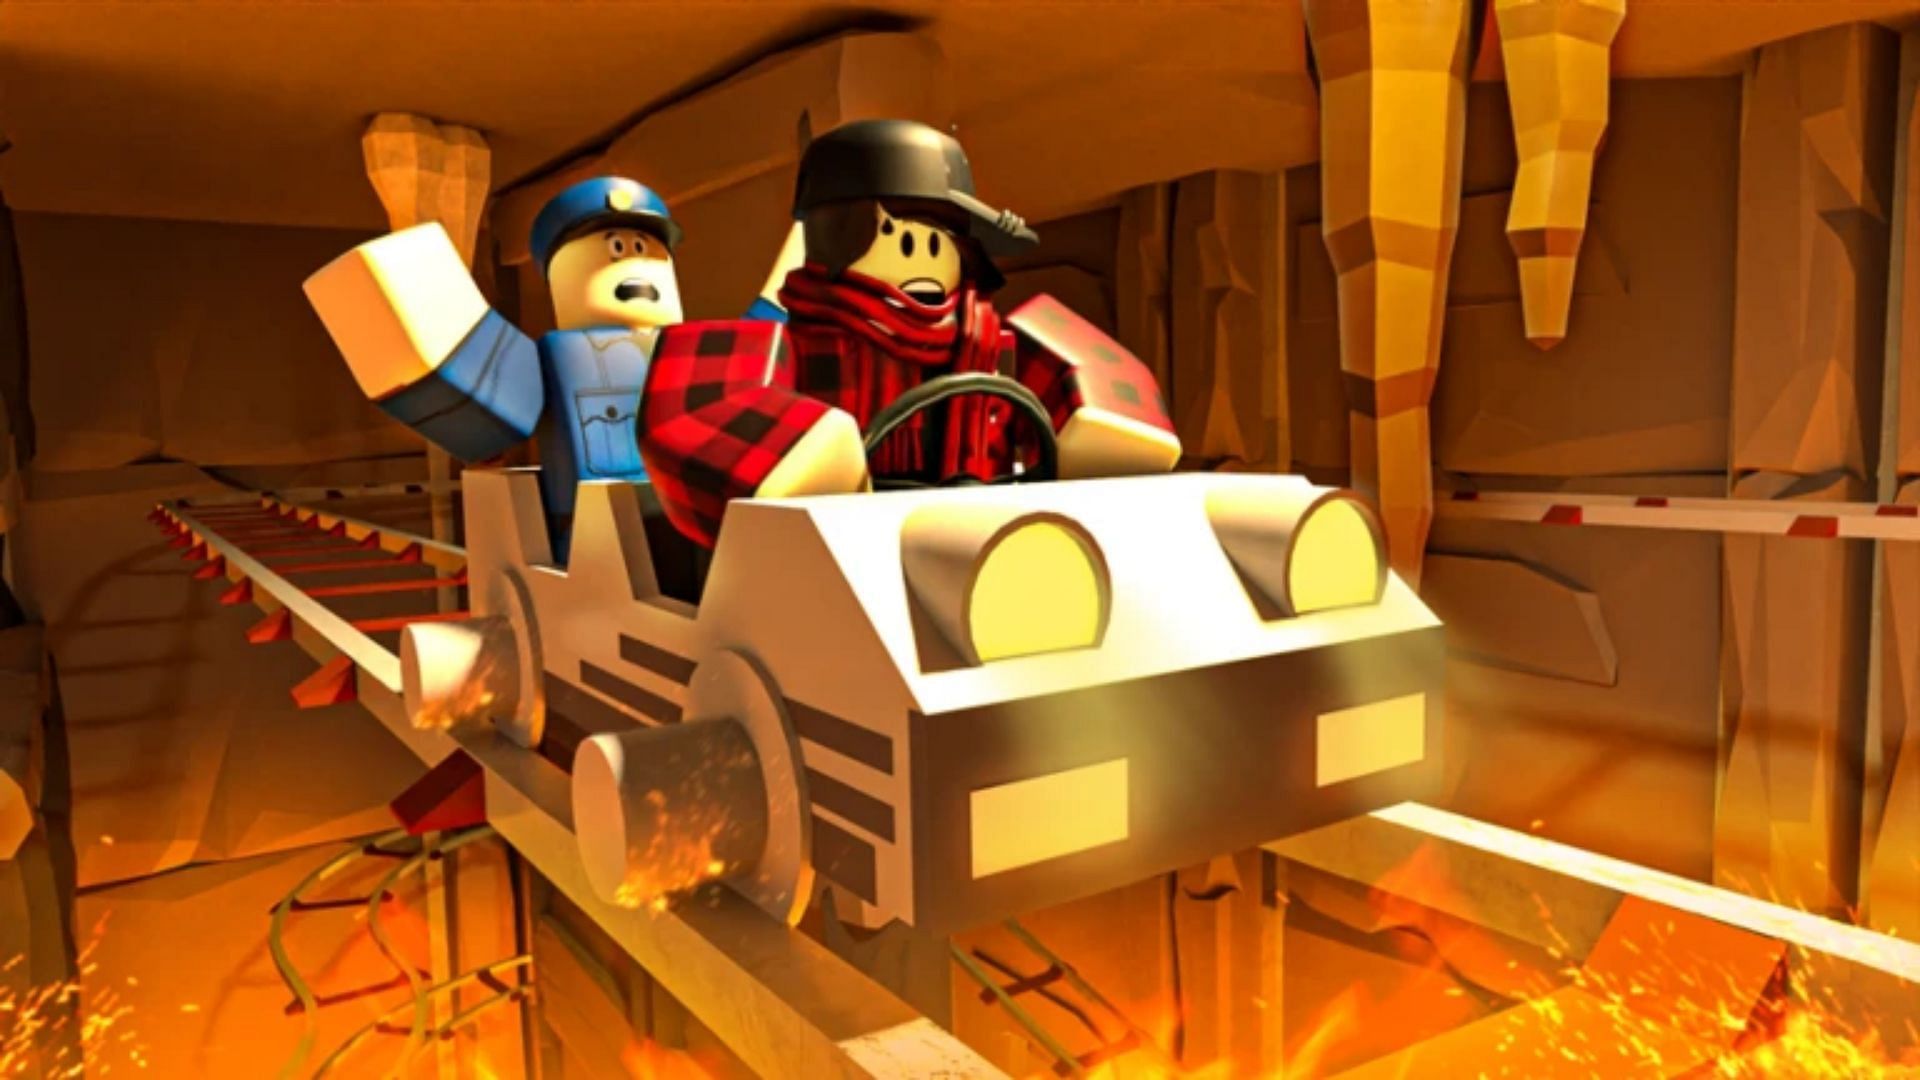 Codes for Cart Ride Simulator and their importance (Image via Roblox)